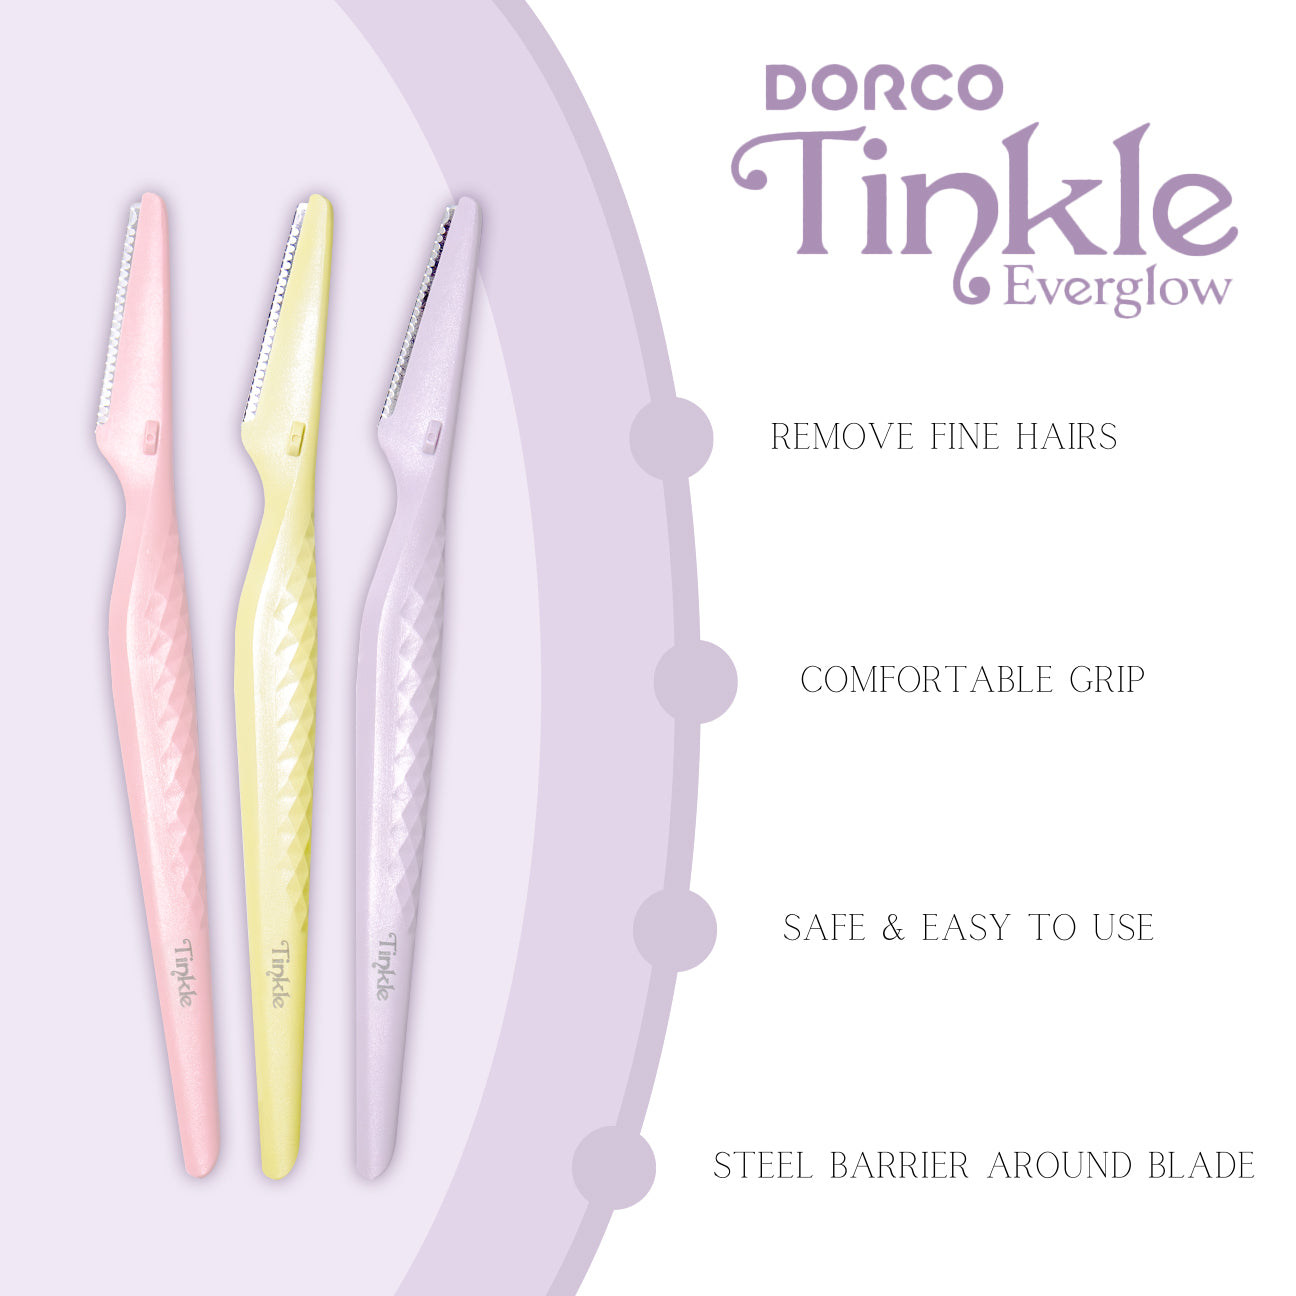 Tinkle 2 Everglow - The Dermaplanning Tool (3 blades)